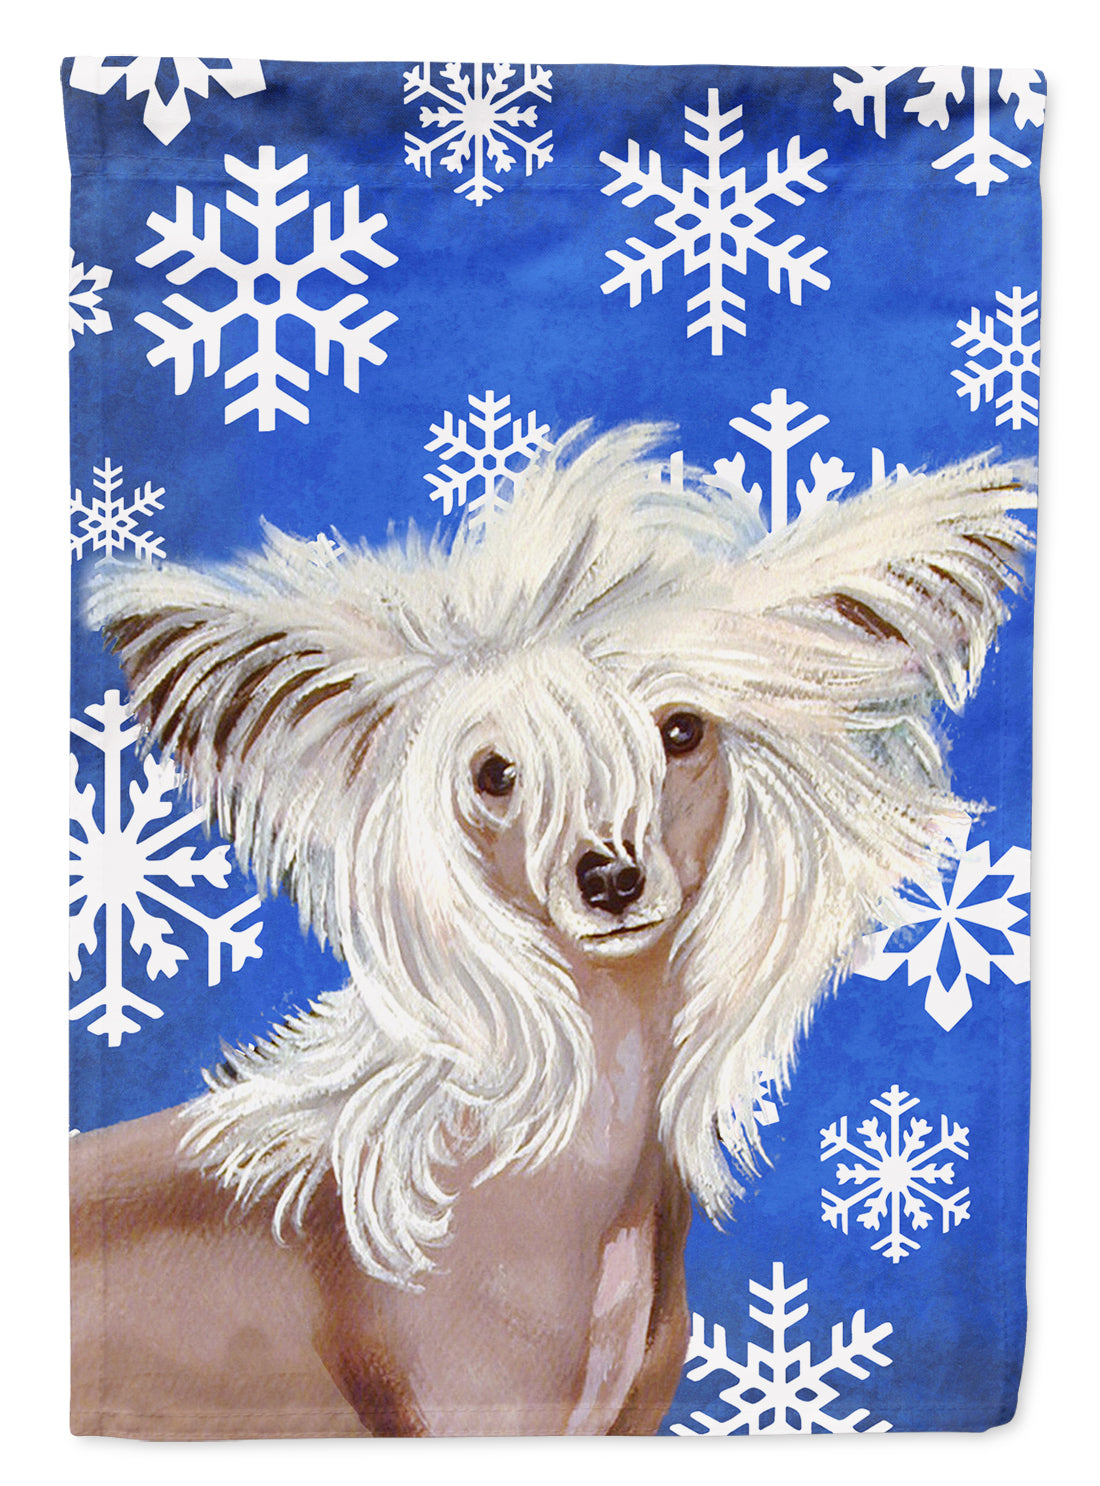 Chinese Crested Winter Snowflakes Holiday Flag Garden Size